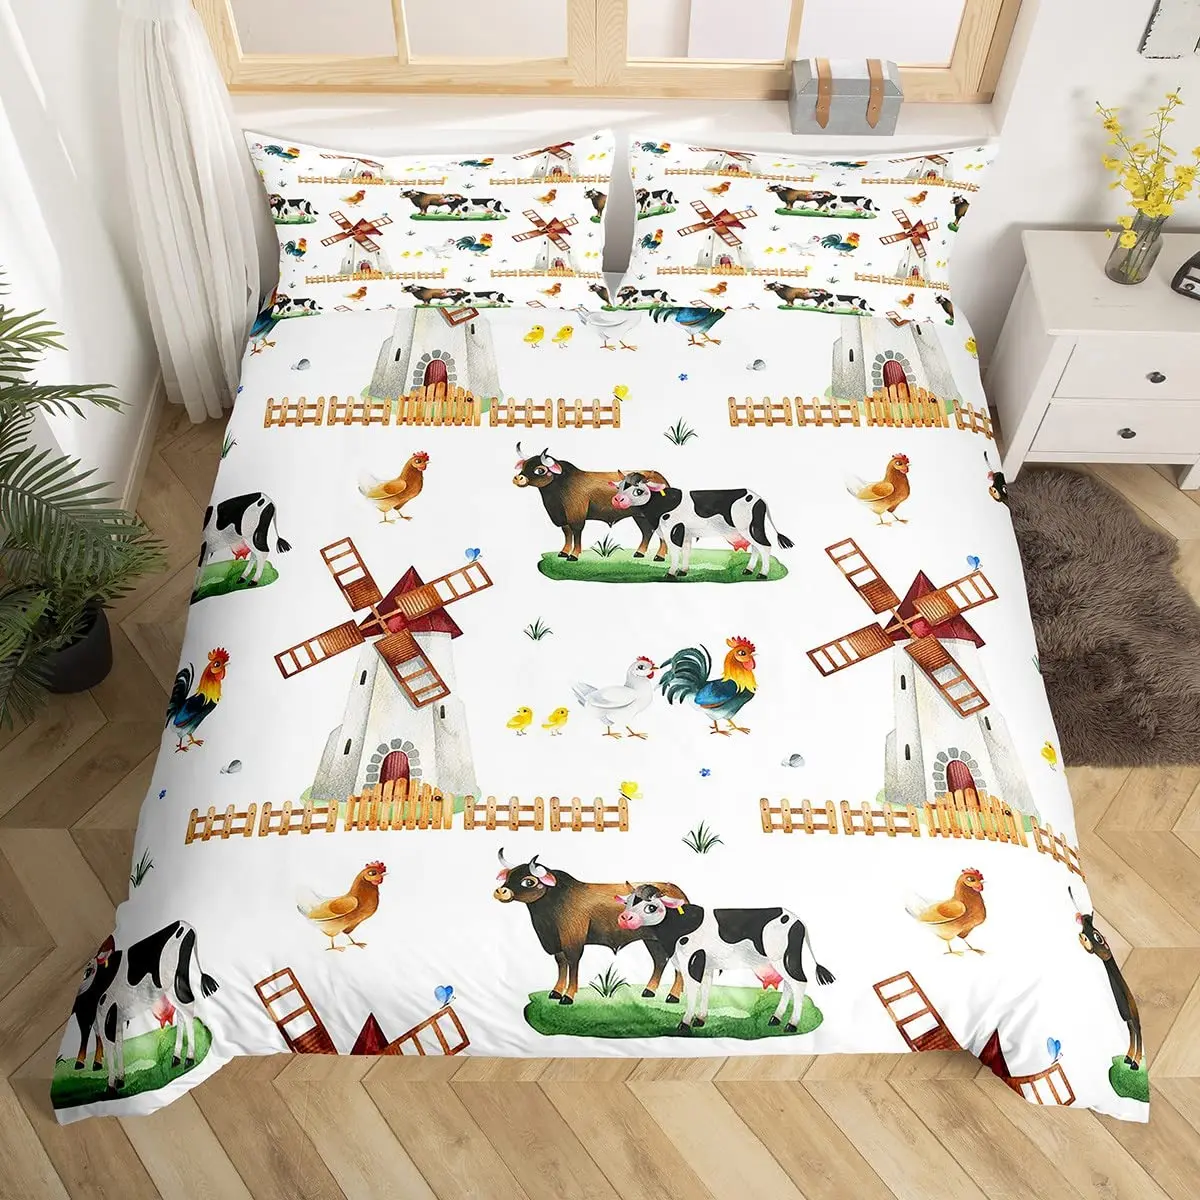 Milk Cow Wild Animals Pattern Duvet Cover Set King Queen Size Polyester Comforter Cover for Kid Girl Bedding Set with Pillowcase